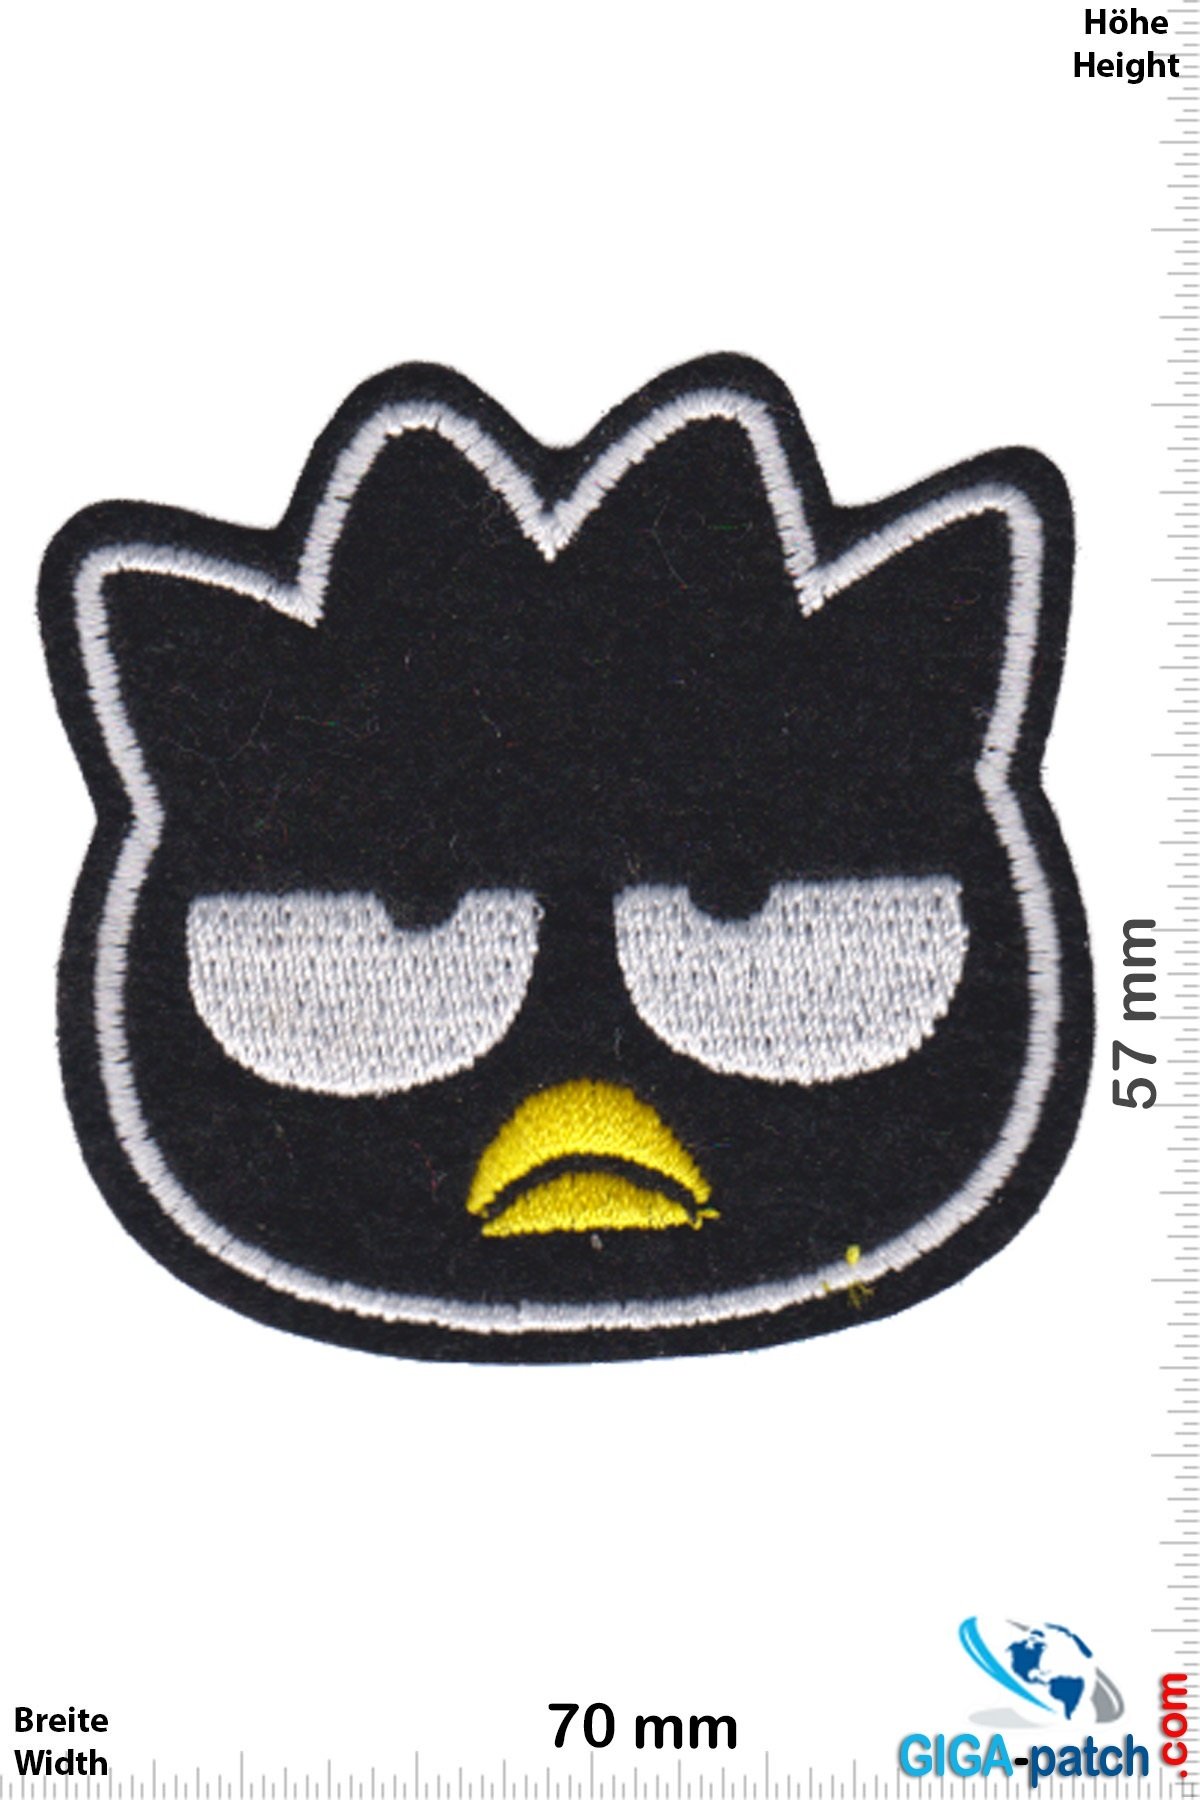 Hello Kitty - Patch - Back Patches - Patch Keychains Stickers -   - Biggest Patch Shop worldwide